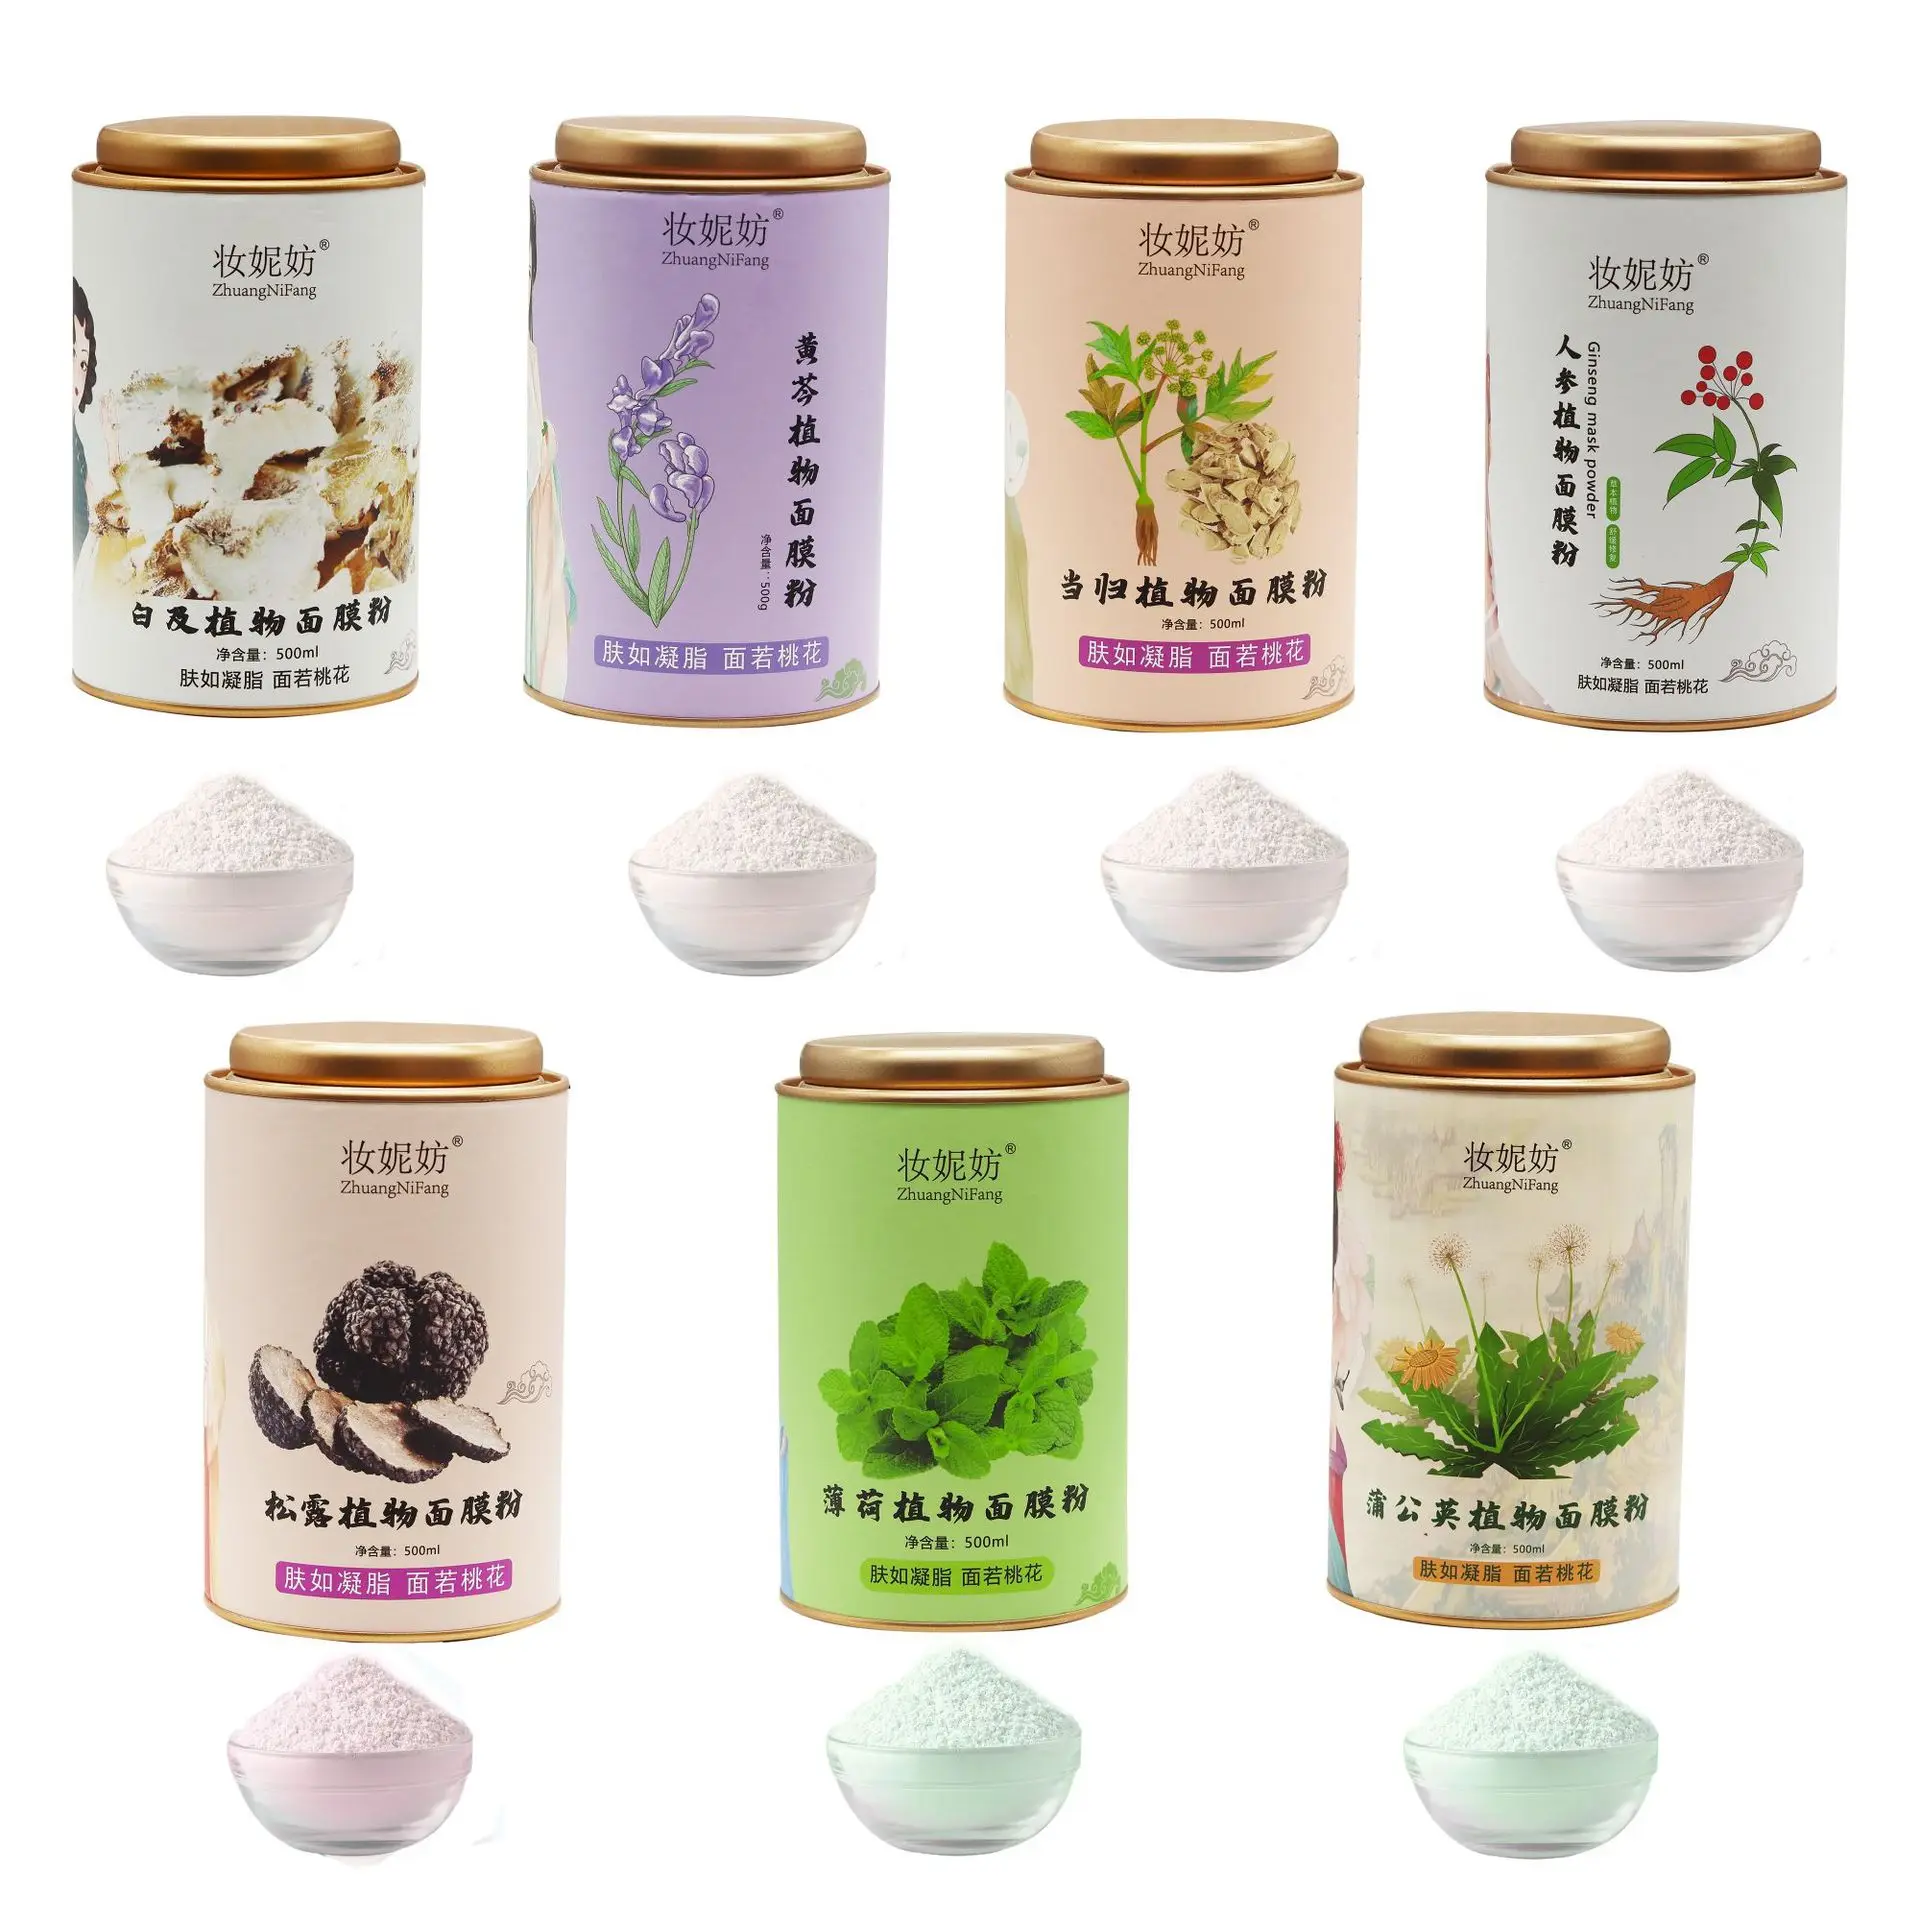 500ml Soft Mask Powder Canned Moisturizing and Hydrating Chamomile Herbal Seaweed Garden Pack Mint Mask Powder Free Shipping